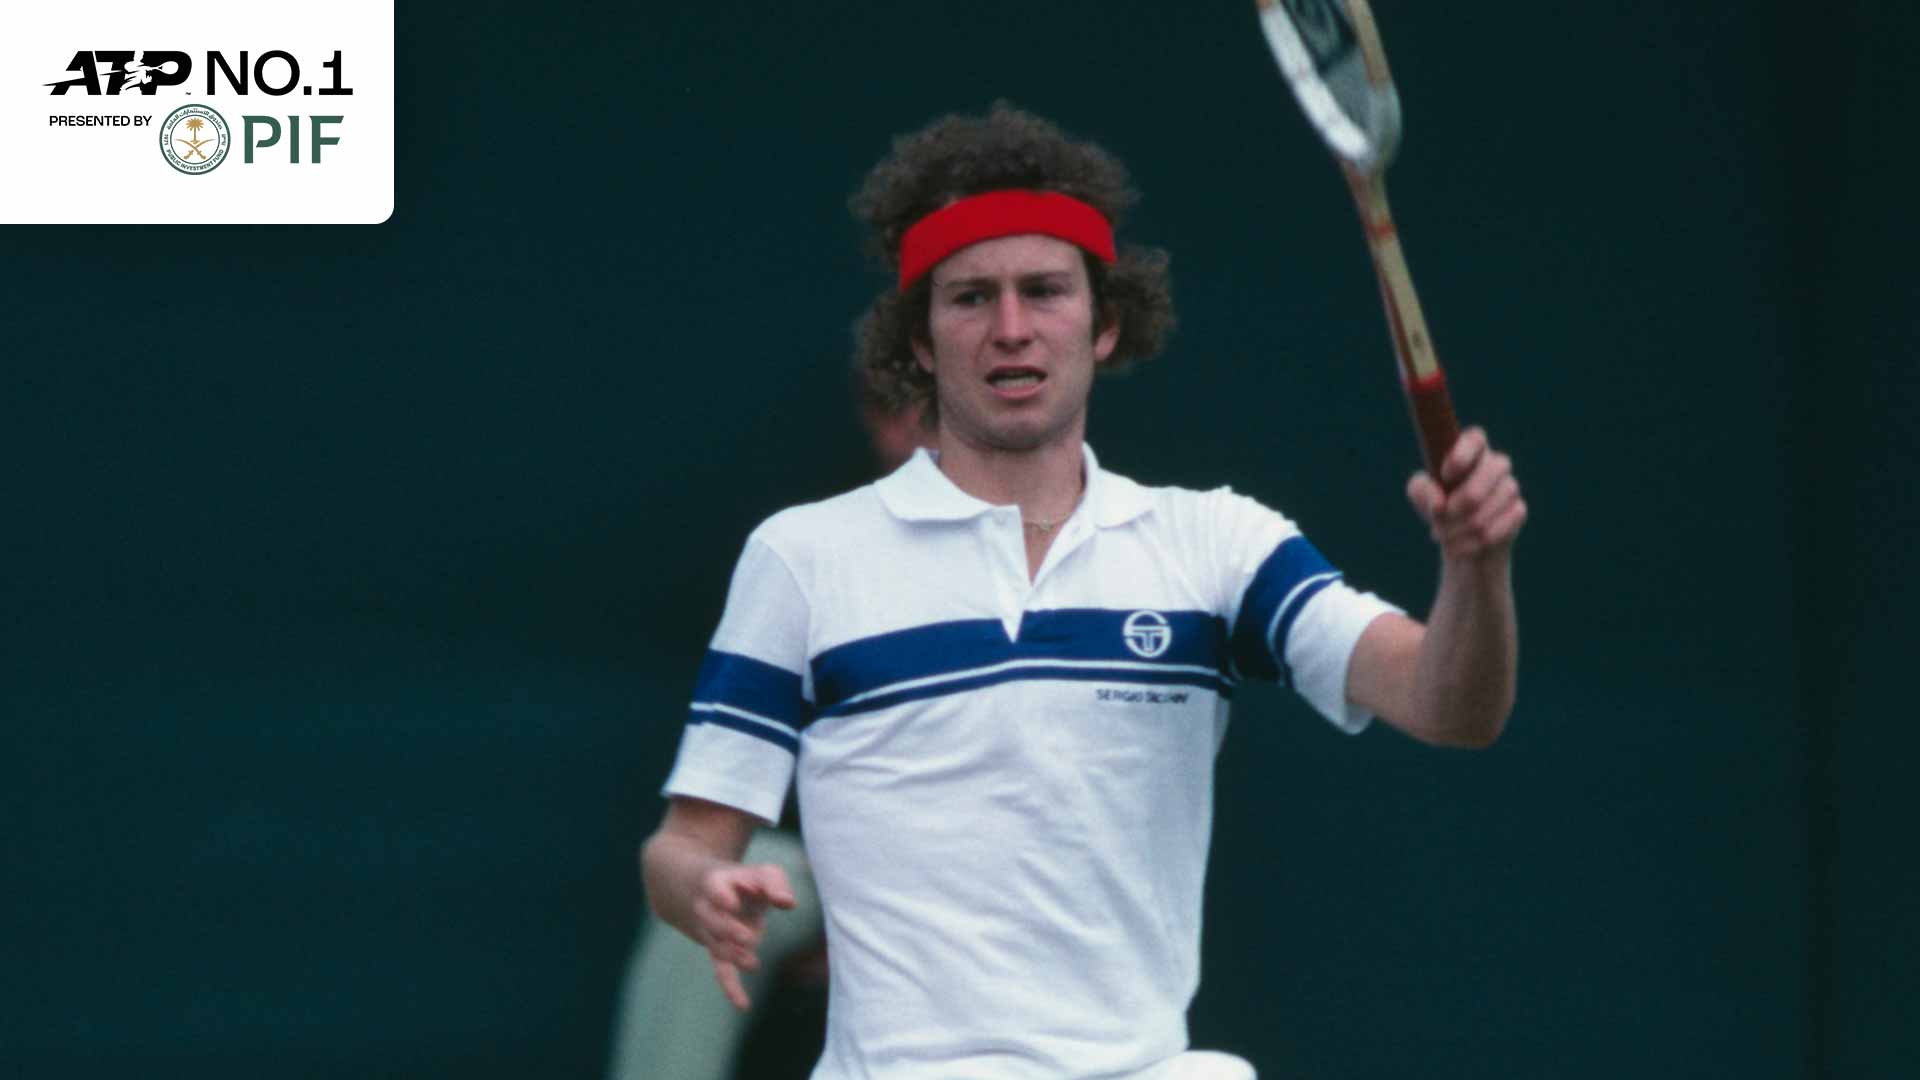 American John McEnroe, the fifth player to rise to No. 1 in the history of the PIF ATP Rankings, finished the 1981-84 seasons in top spot.